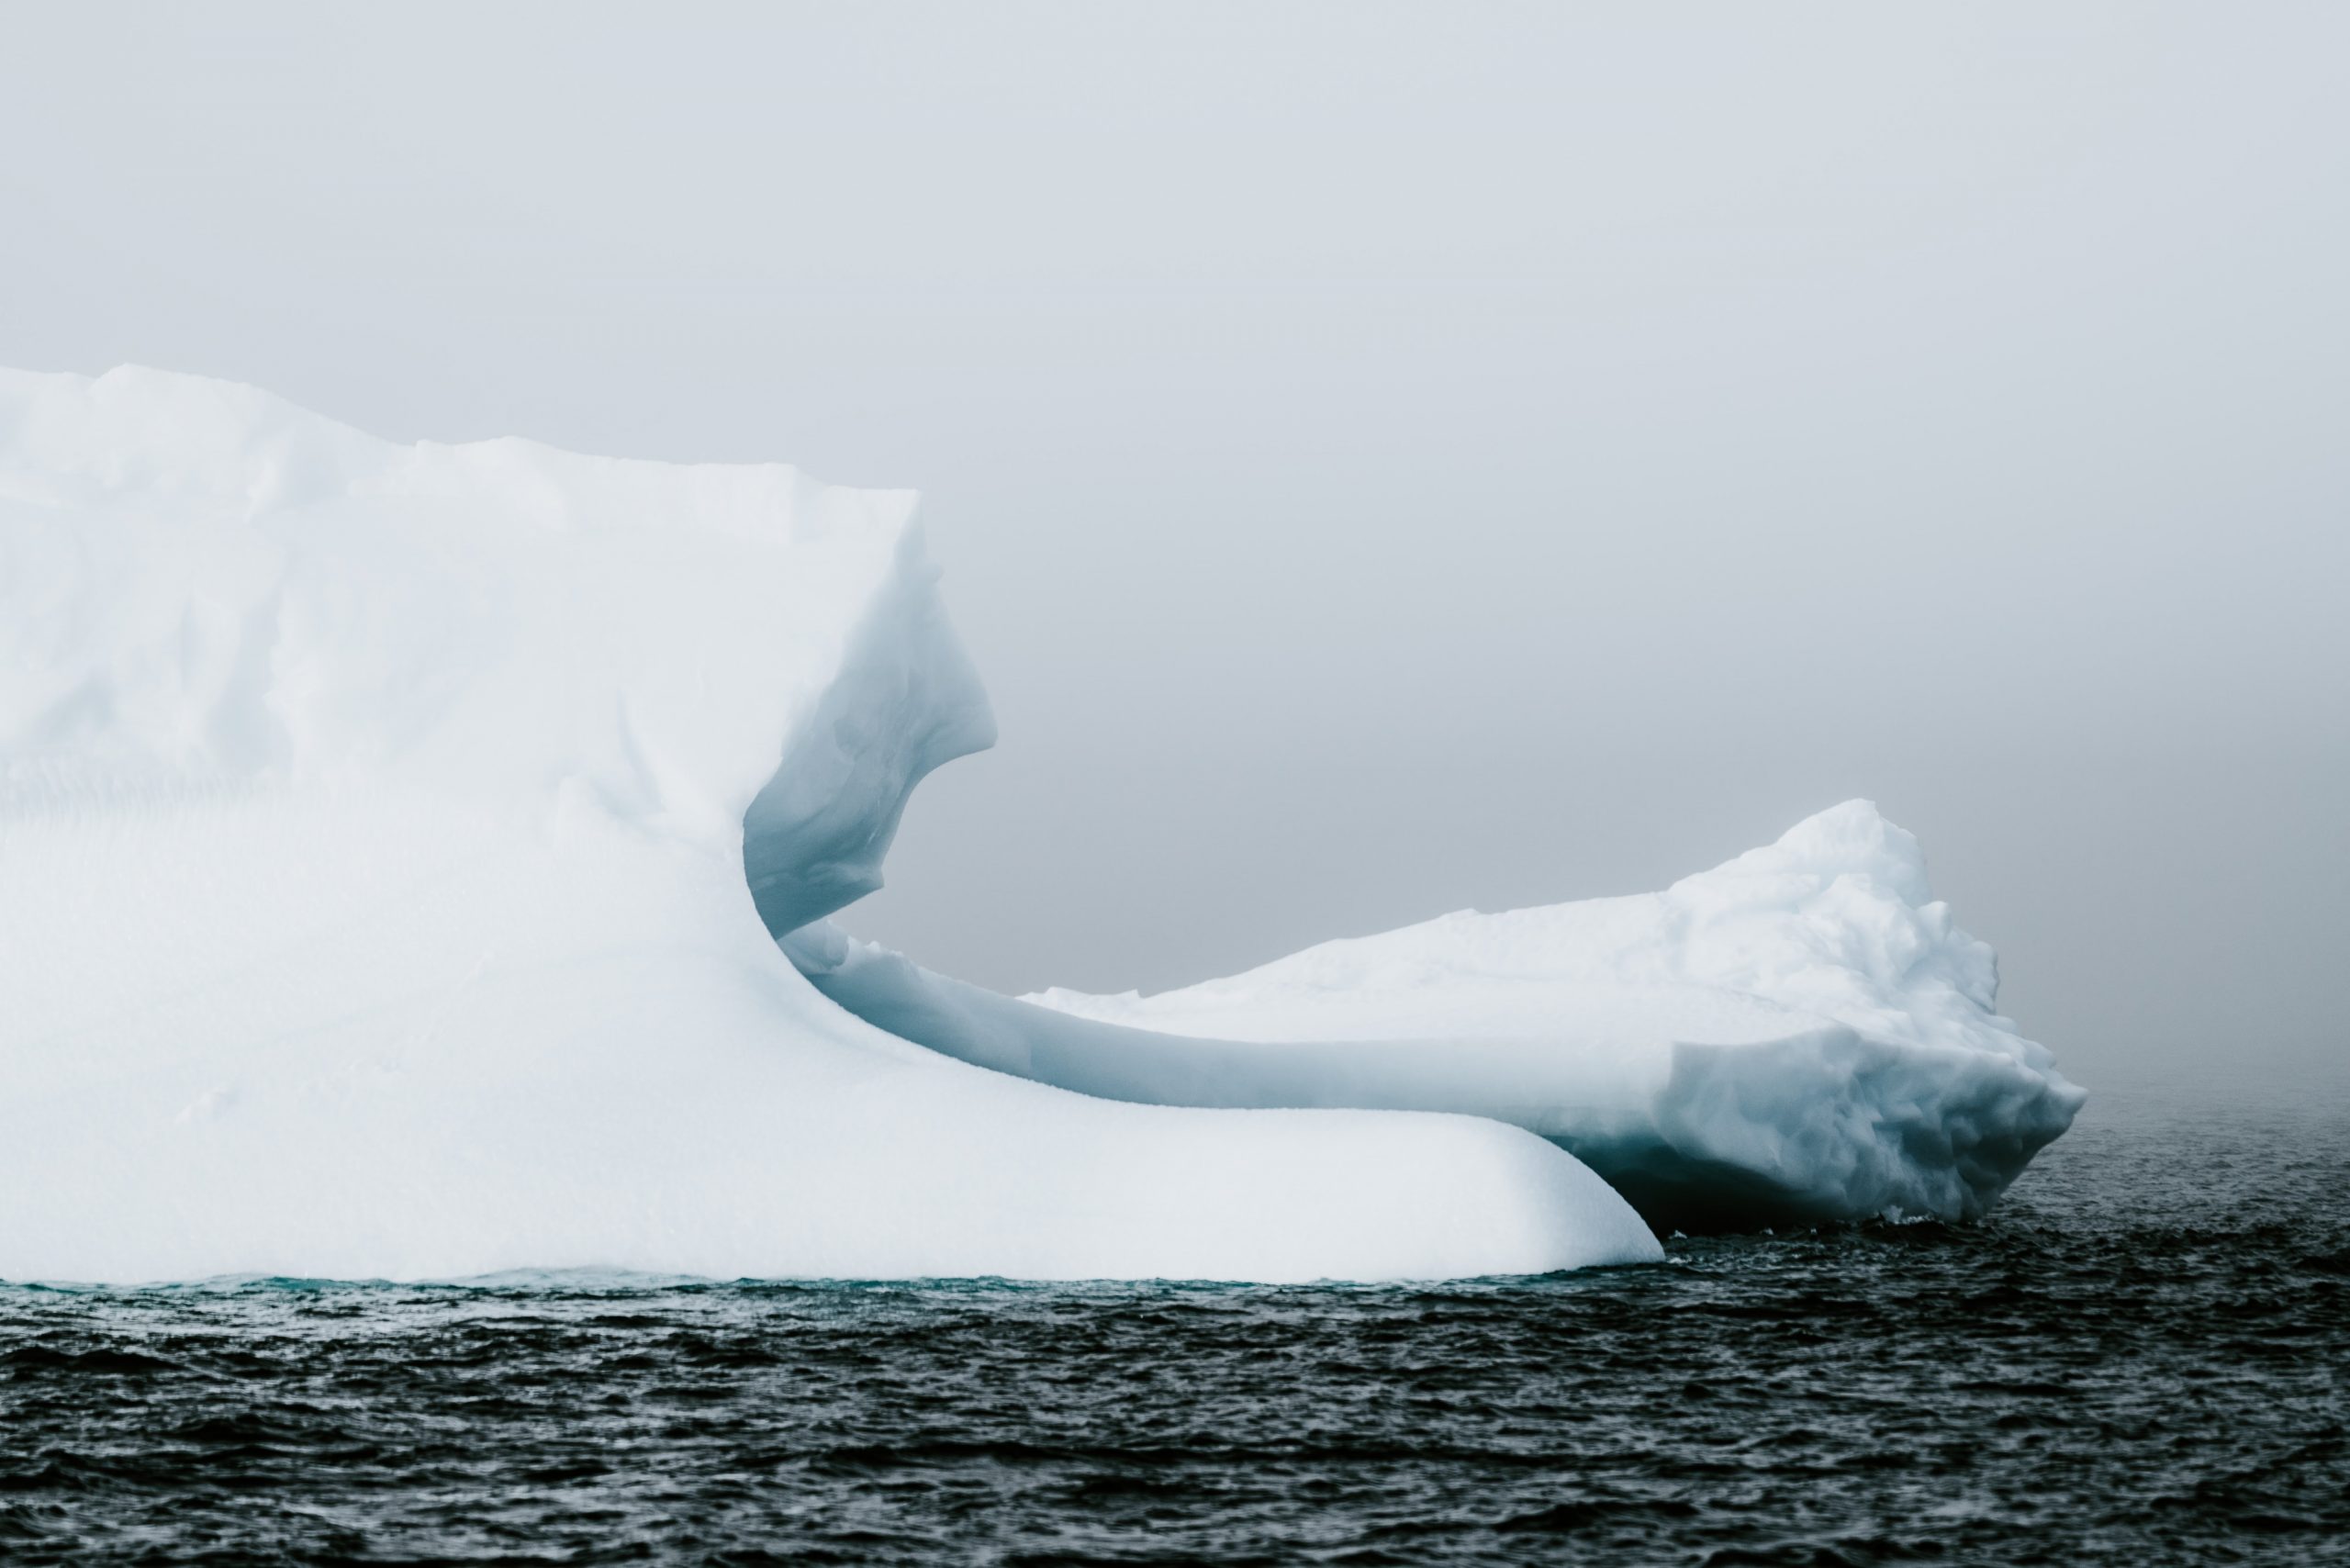 A photograph of two large, white icebergs resting in a cold, dark blue ocean. The sky is a misty grey.